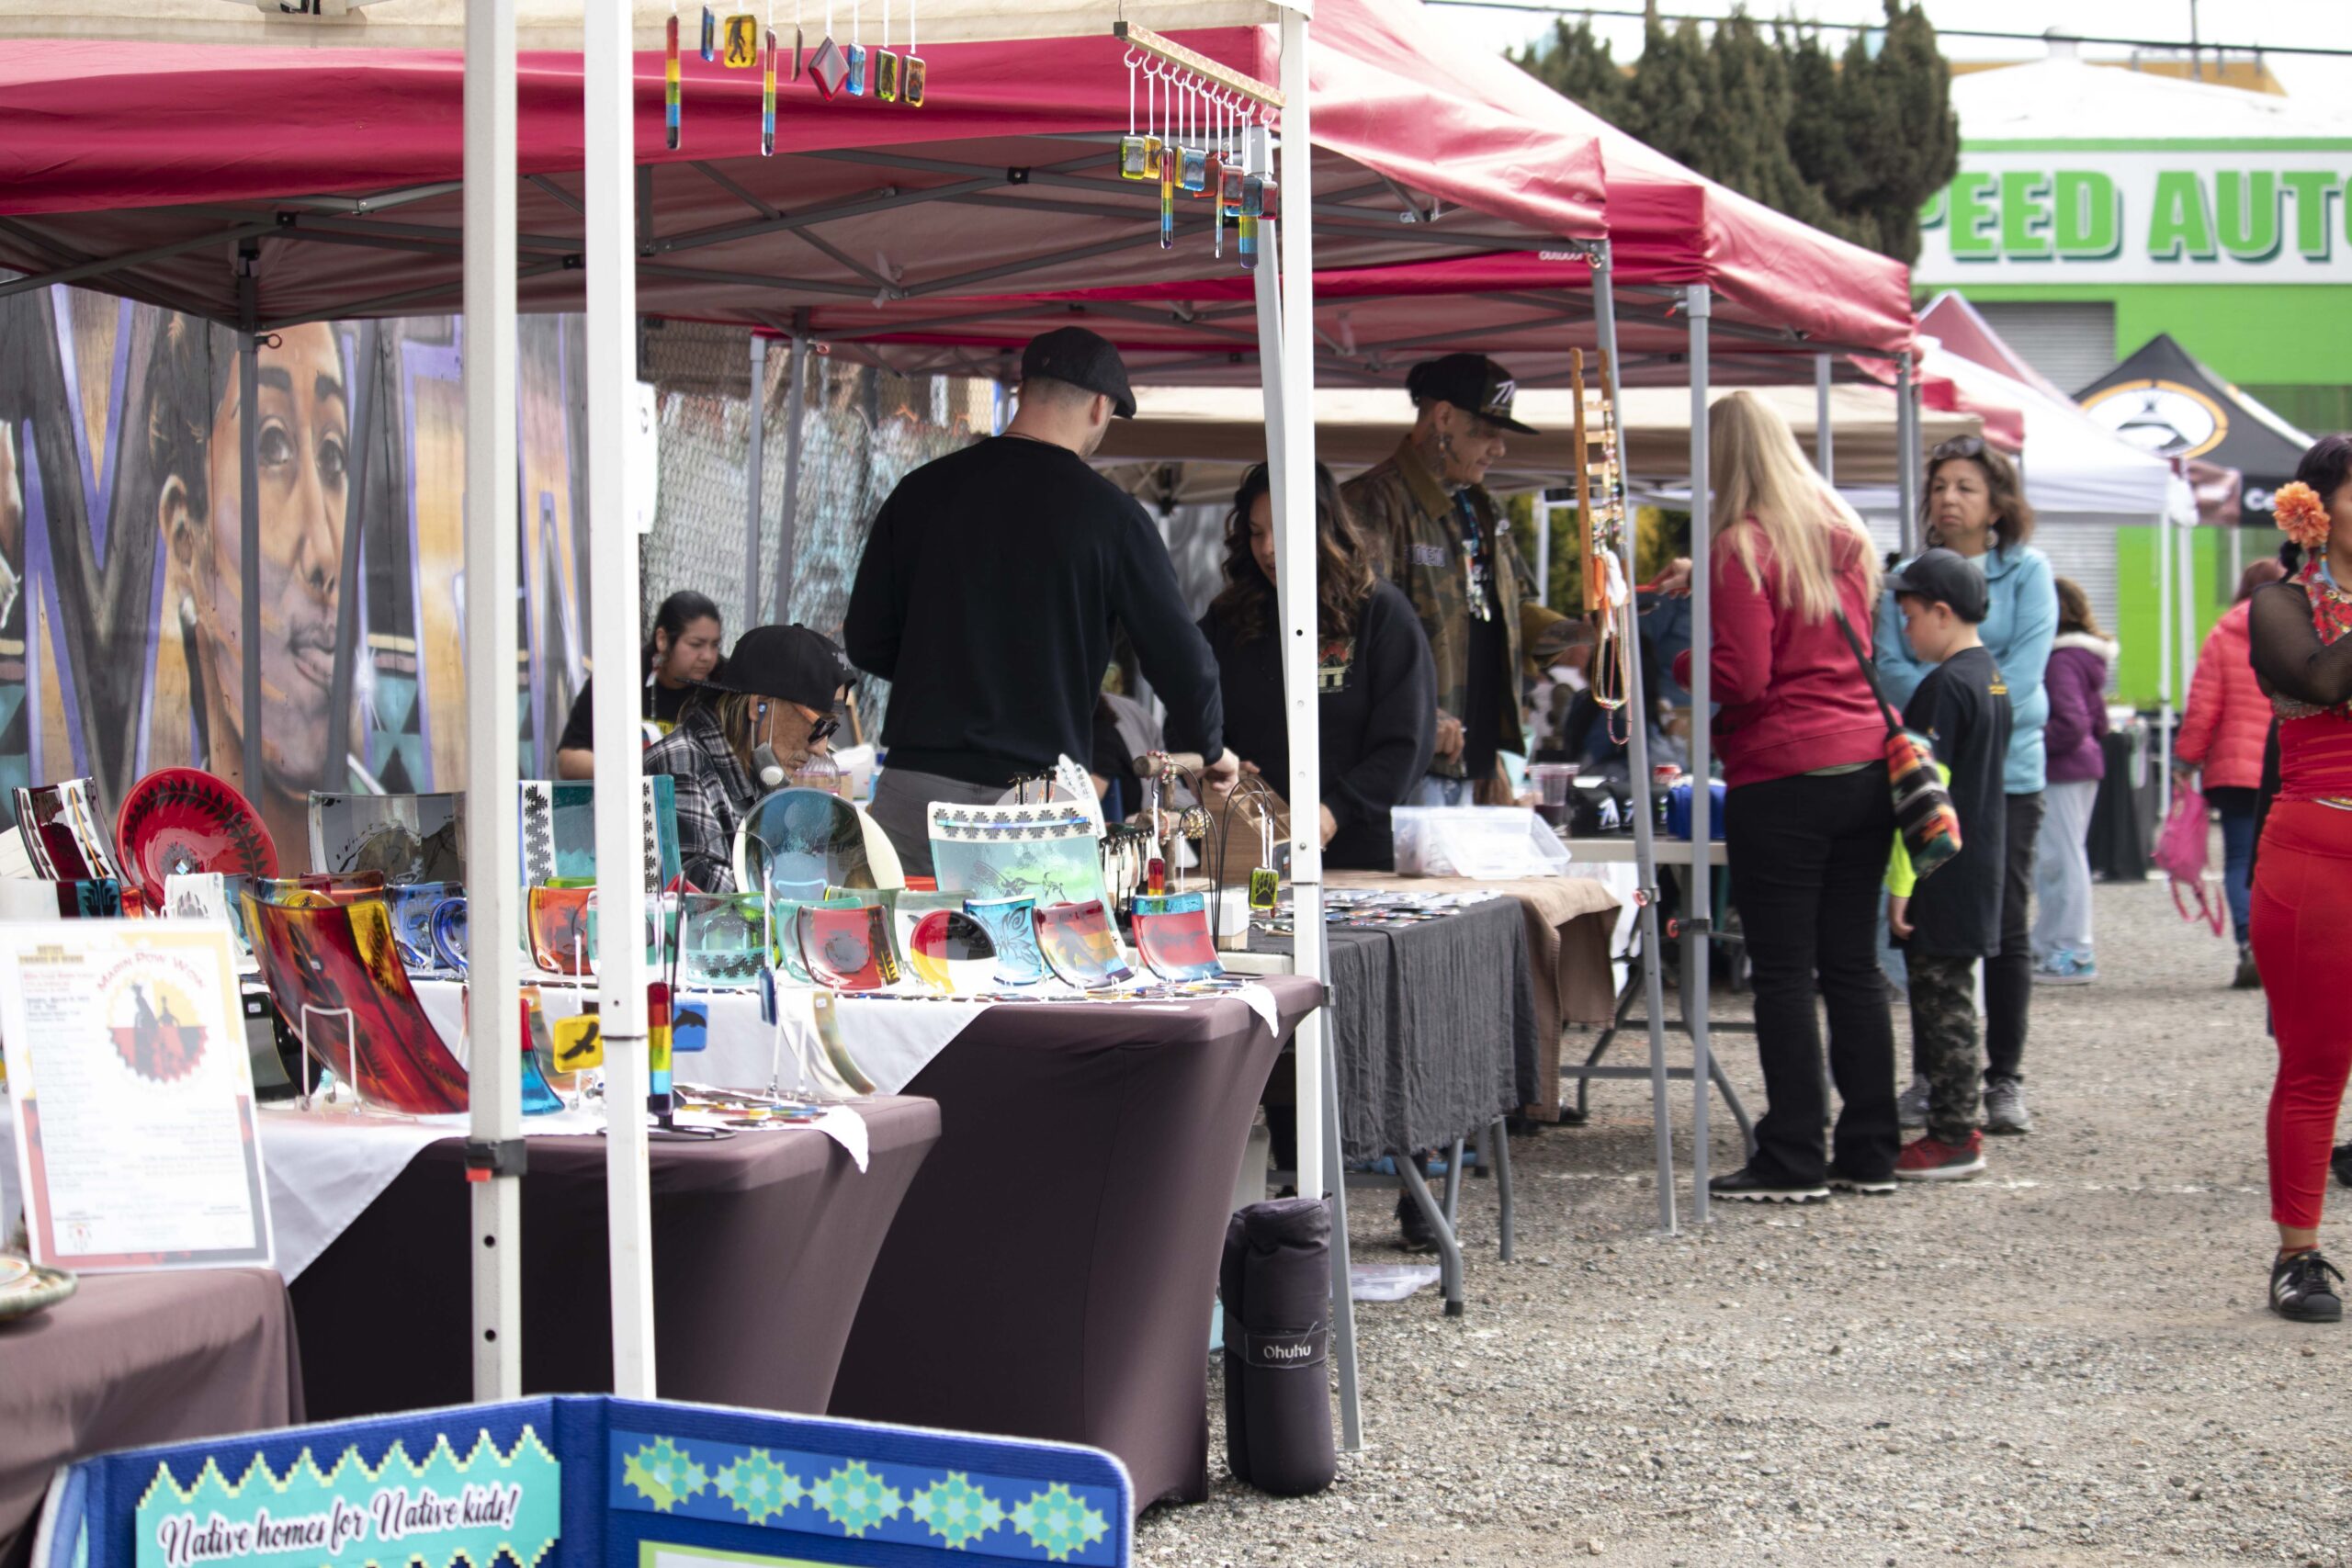 Attendees browsing Indigenous Red Market vendors displaying traditional Native American art